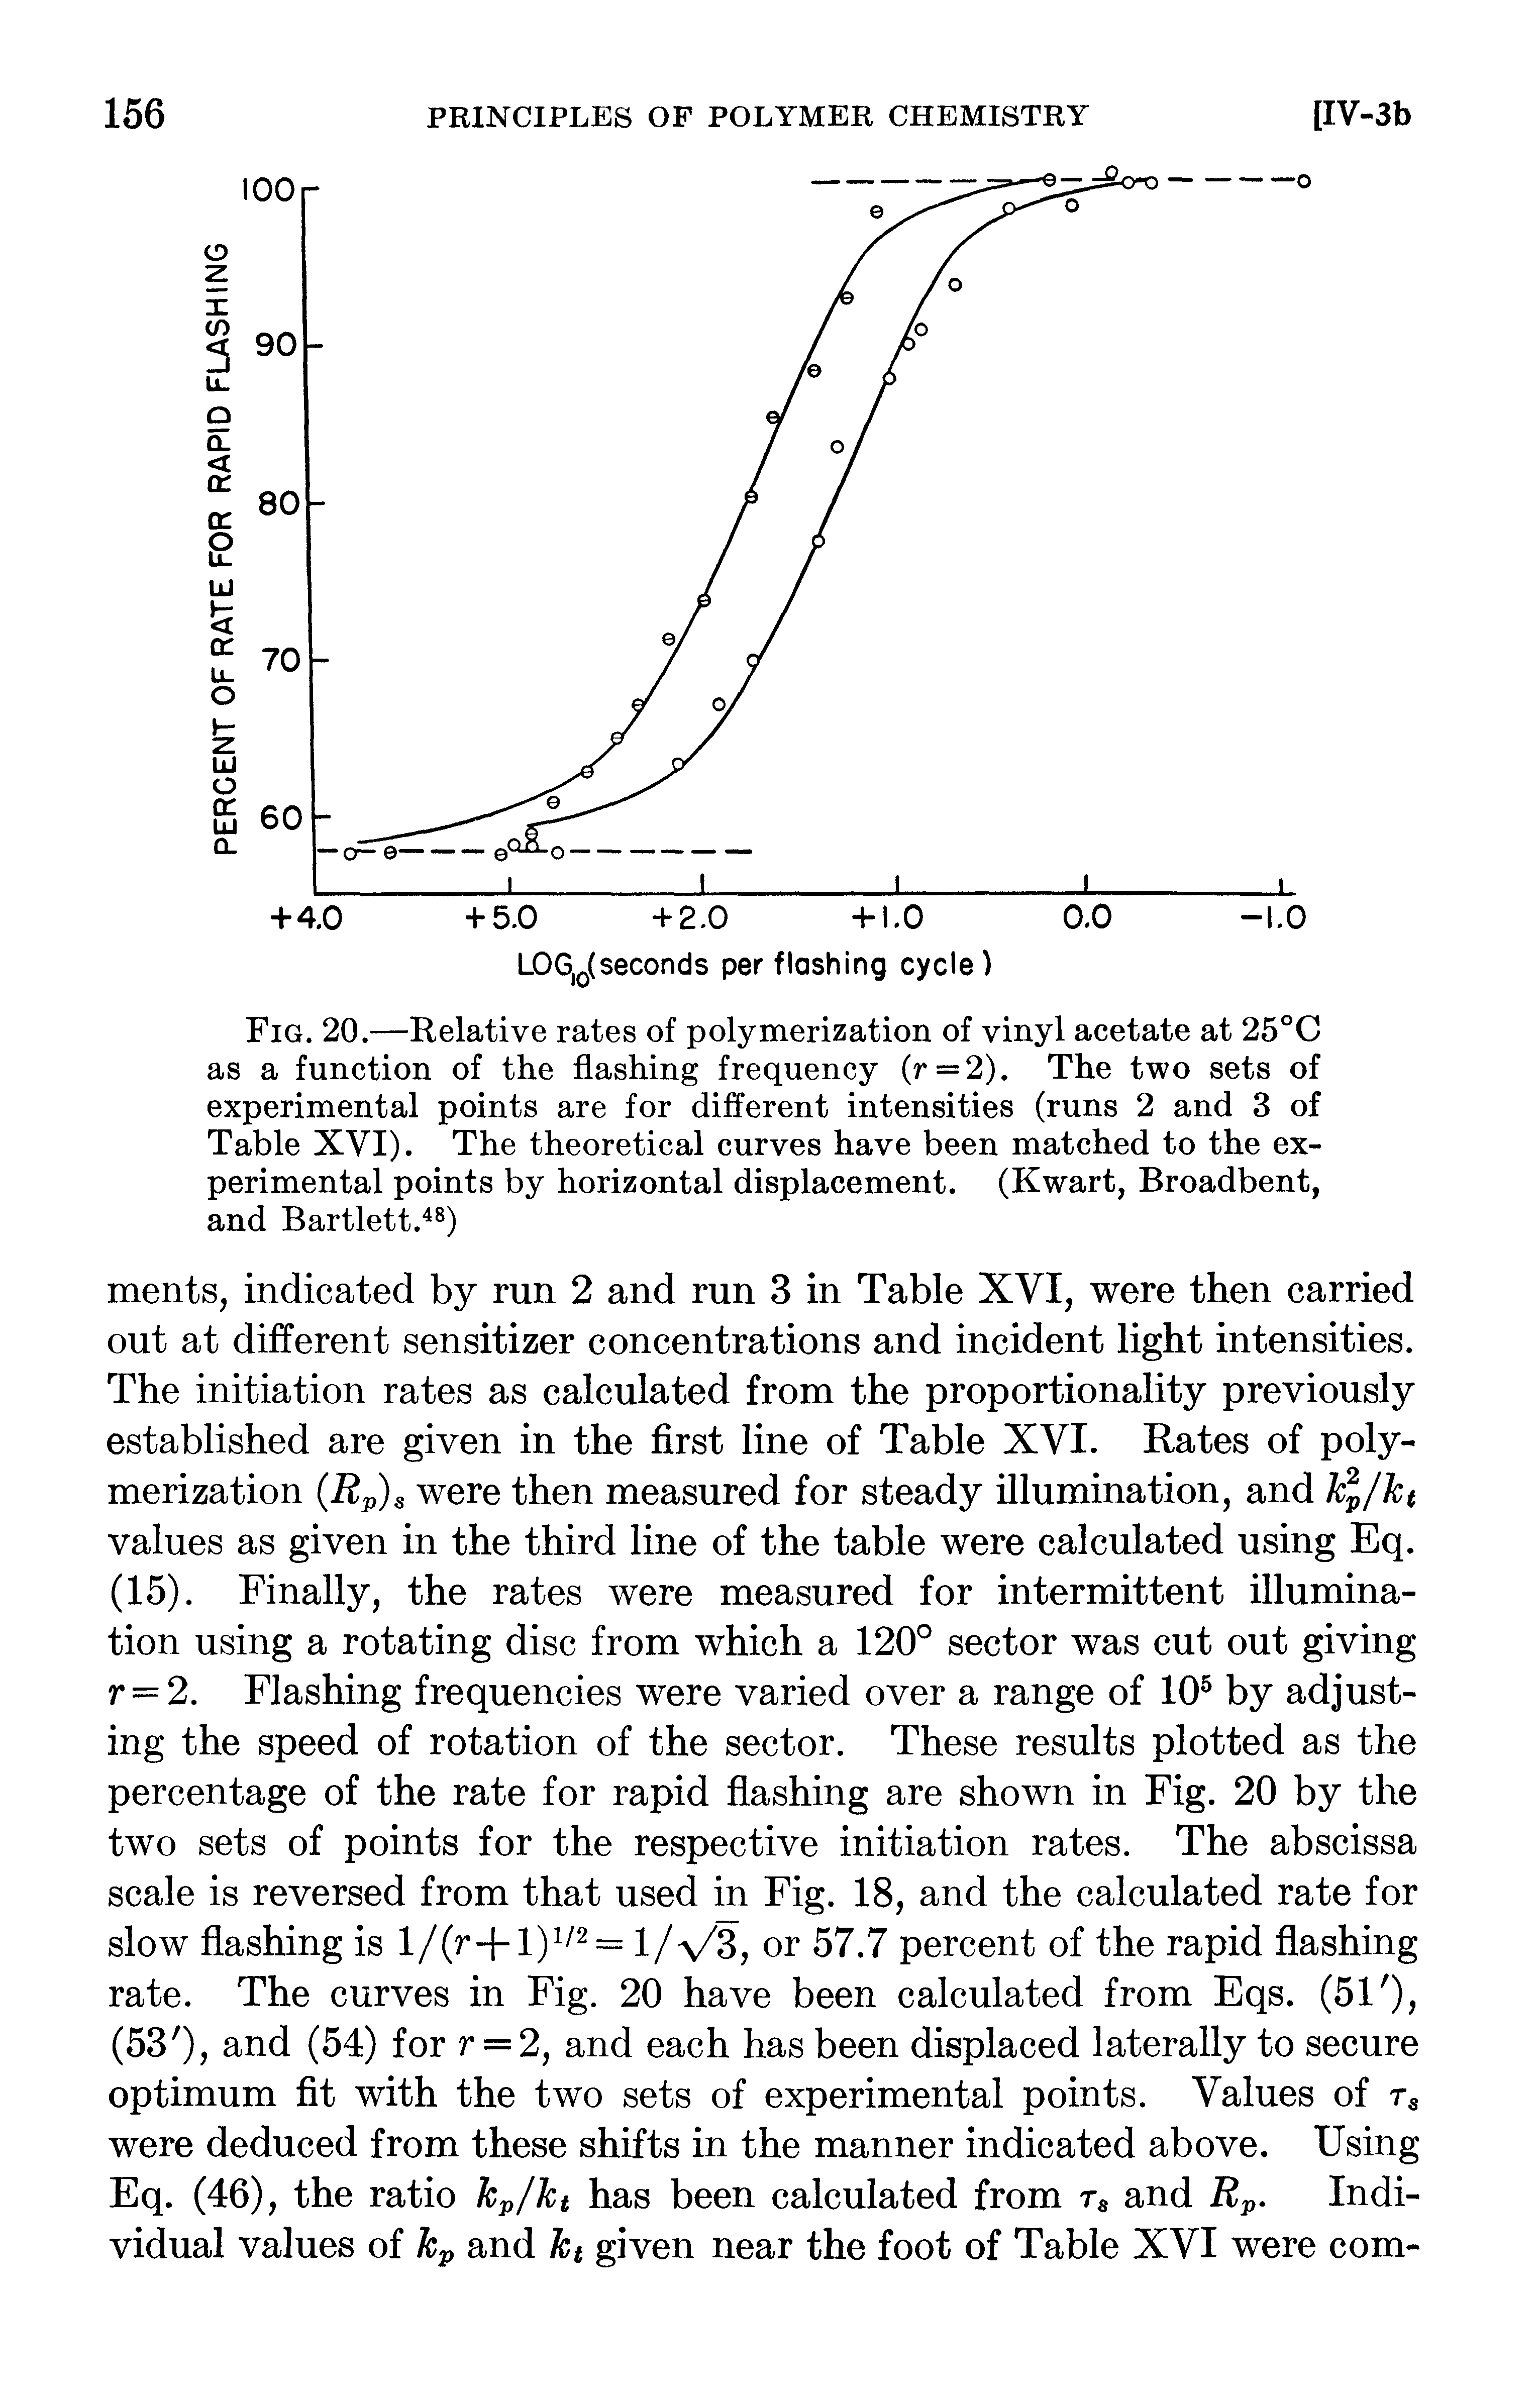 Fig. 20.—Relative rates of polymerization of vinyl acetate at 25°C as a function of the flashing frequency (r=2). The two sets of experimental points are for different intensities (runs 2 and 3 of Table XVI). The theoretical curves have been matched to the experimental points by horizontal displacement. (Kwart, Broadbent, and Bartlett. )...